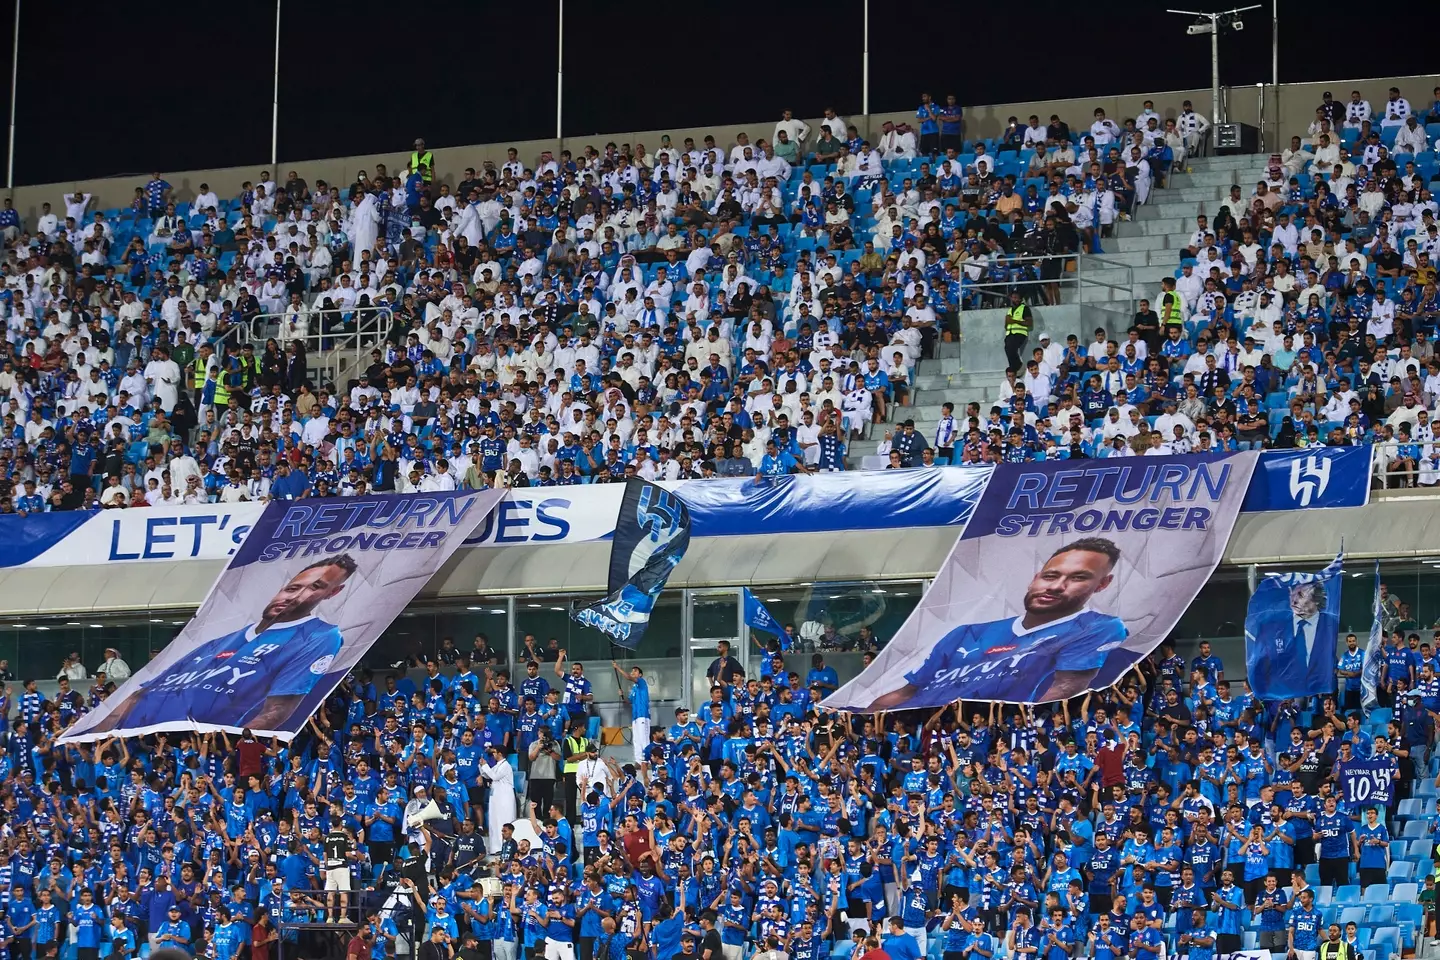 Al Hilal fans are fully behind Neymar and can't wait for their star player to return. (Image